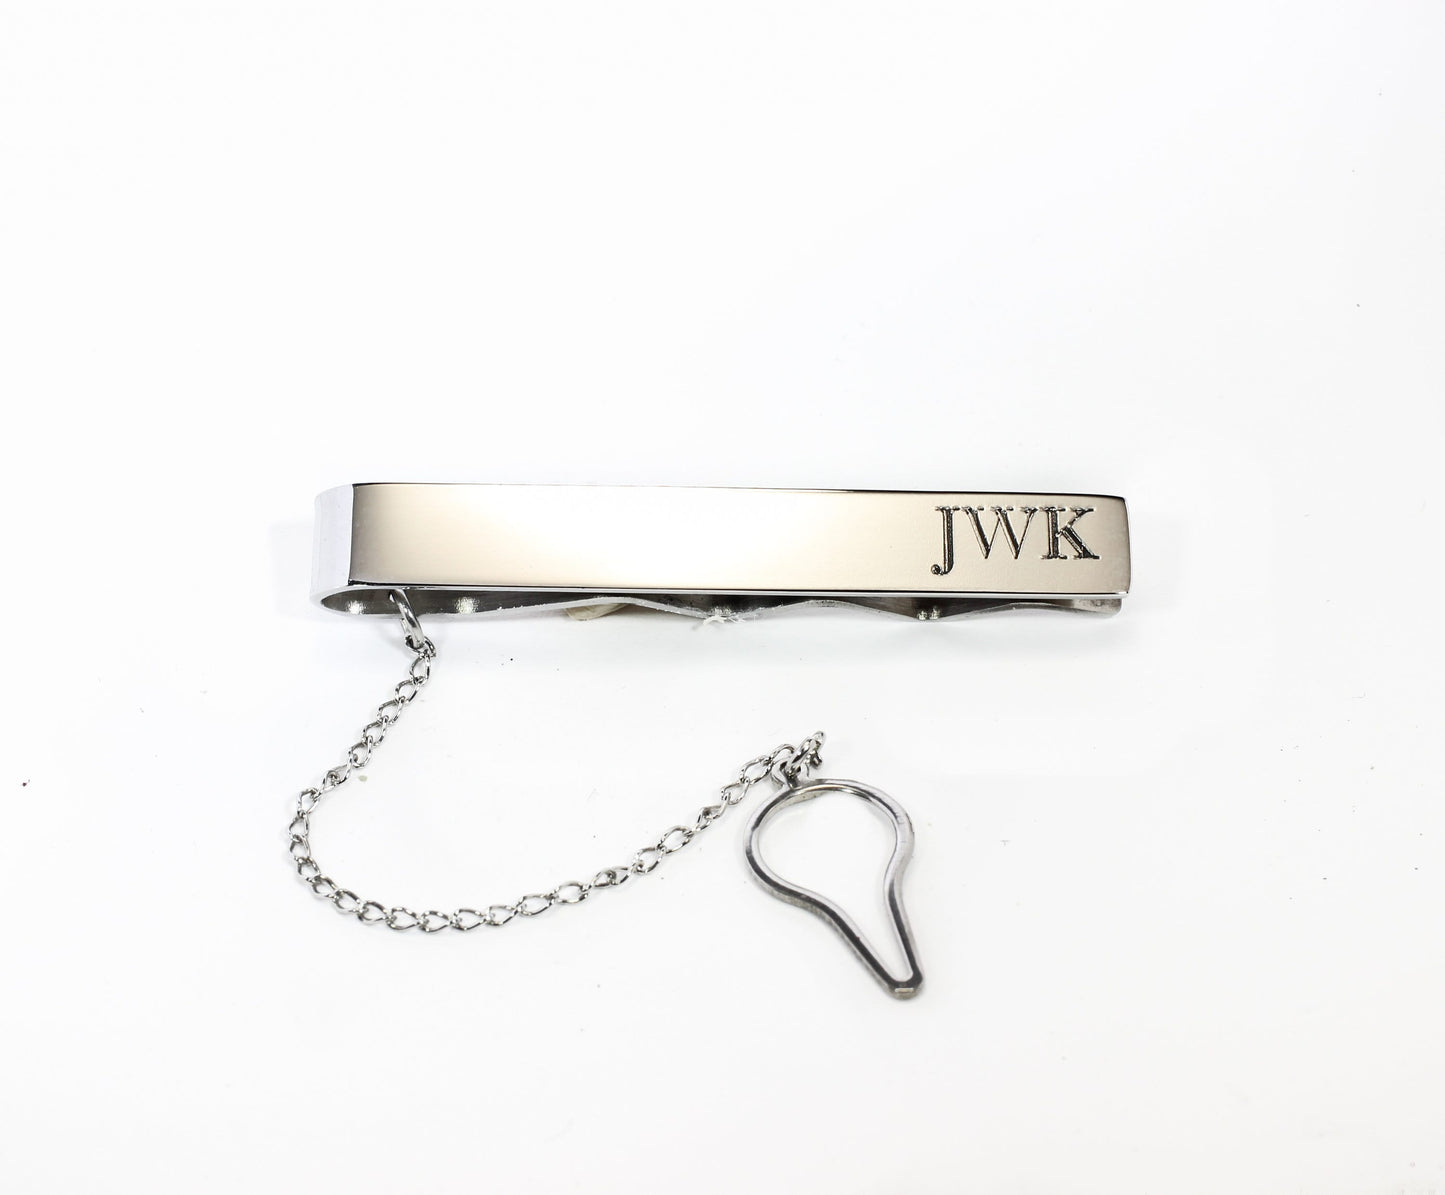 Custom Tie Clip with Chain // Groomsmen Tie Clip // Personalized Father's Day Gift // Stainless Steel Tie Bar